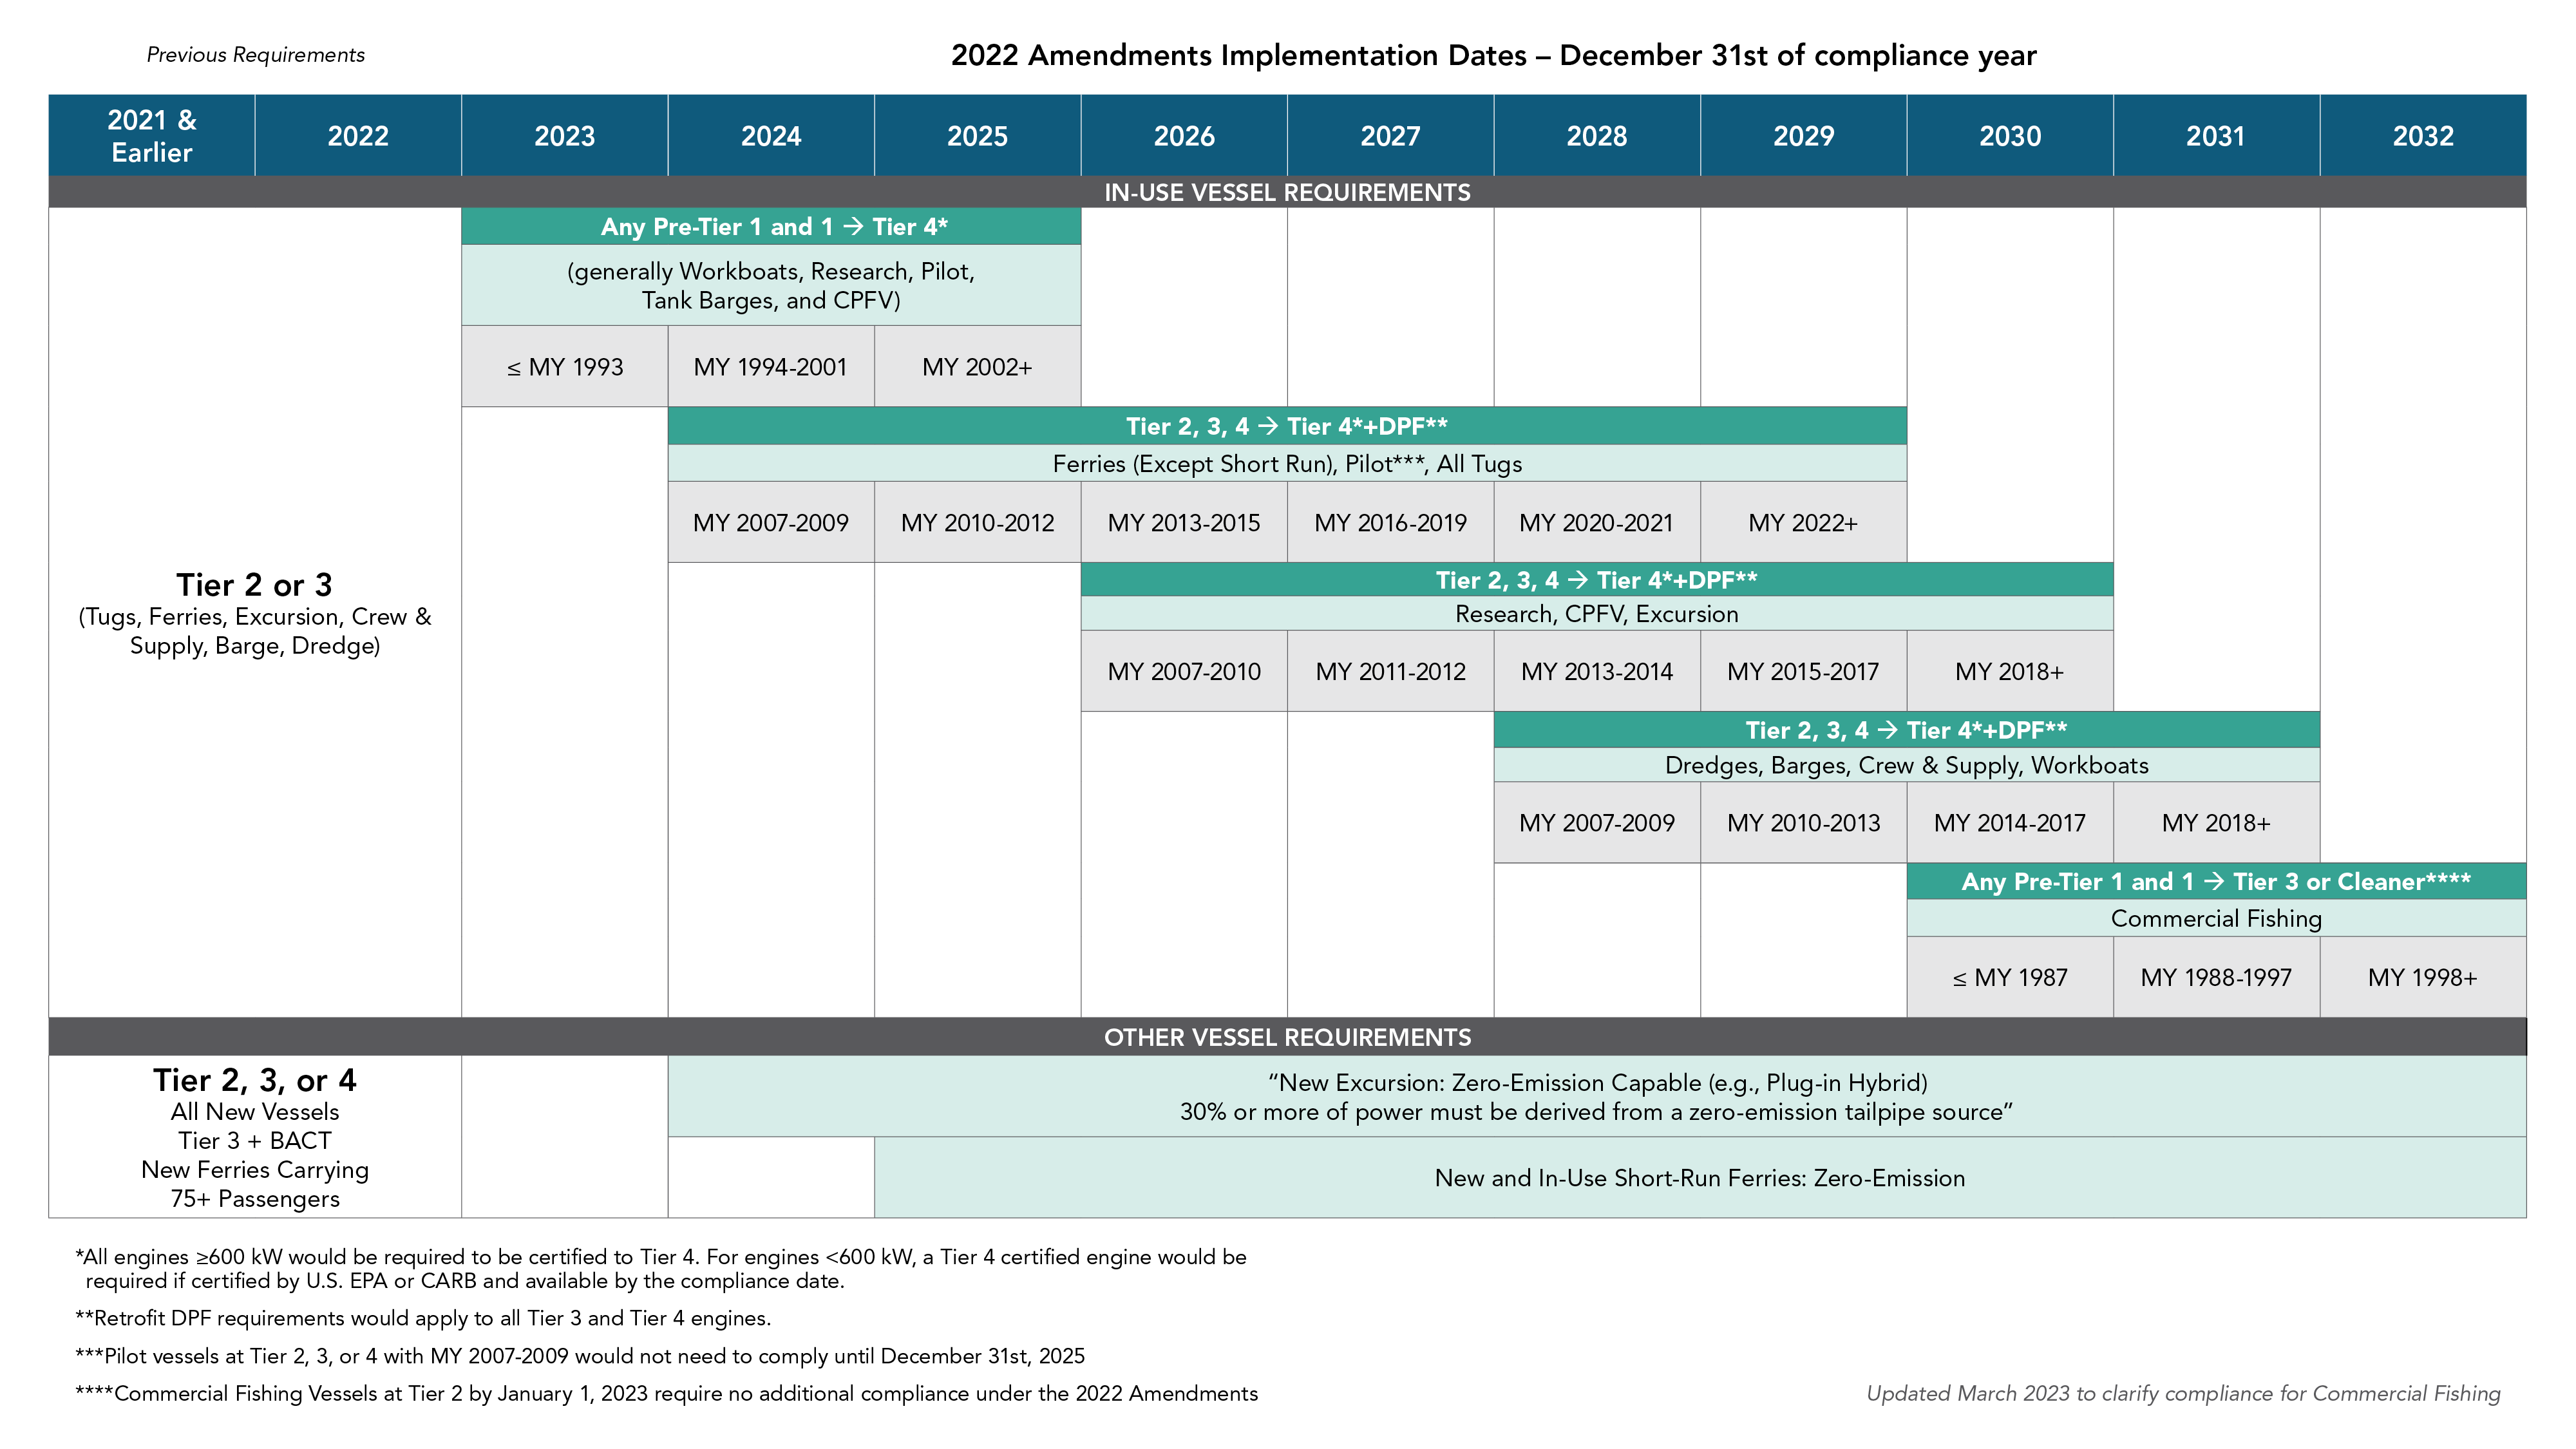 Timeline showing all implementation dates for the 2022 commercial harbor craft regulatory amendments. This is a short summary of the compliance deadlines. For detailed information please see the full regulatory language. For pre-tier 1 and tier 1 certified engines, compliance dates range from the end of 2023 to the end of 2025, depending on the engine model year. For tier 2, 3, of 4 engines used on all ferries except short run ferries, pilot vessels, tugboats and push boats, compliance dates range from the end of 2024 to the end of 2029, depending on the engine model  year. For tier 2, 3, or 4 engines used on research, commercial passenger fishing vessels, and excursion vessels, compliance dates range from the end of 2026 to the end of 2031, depending on the engine model year. For commercial fishing vessels, the compliance dates range from the end of 2030 to the end of 2032, depending on the engine model year. For zero emission capable hybrid vessels, zero emission advanced technology requirements start at the end of 2024, and for zero emission vessels, zero emission advanced technology requirement starts at the end of 2025. 